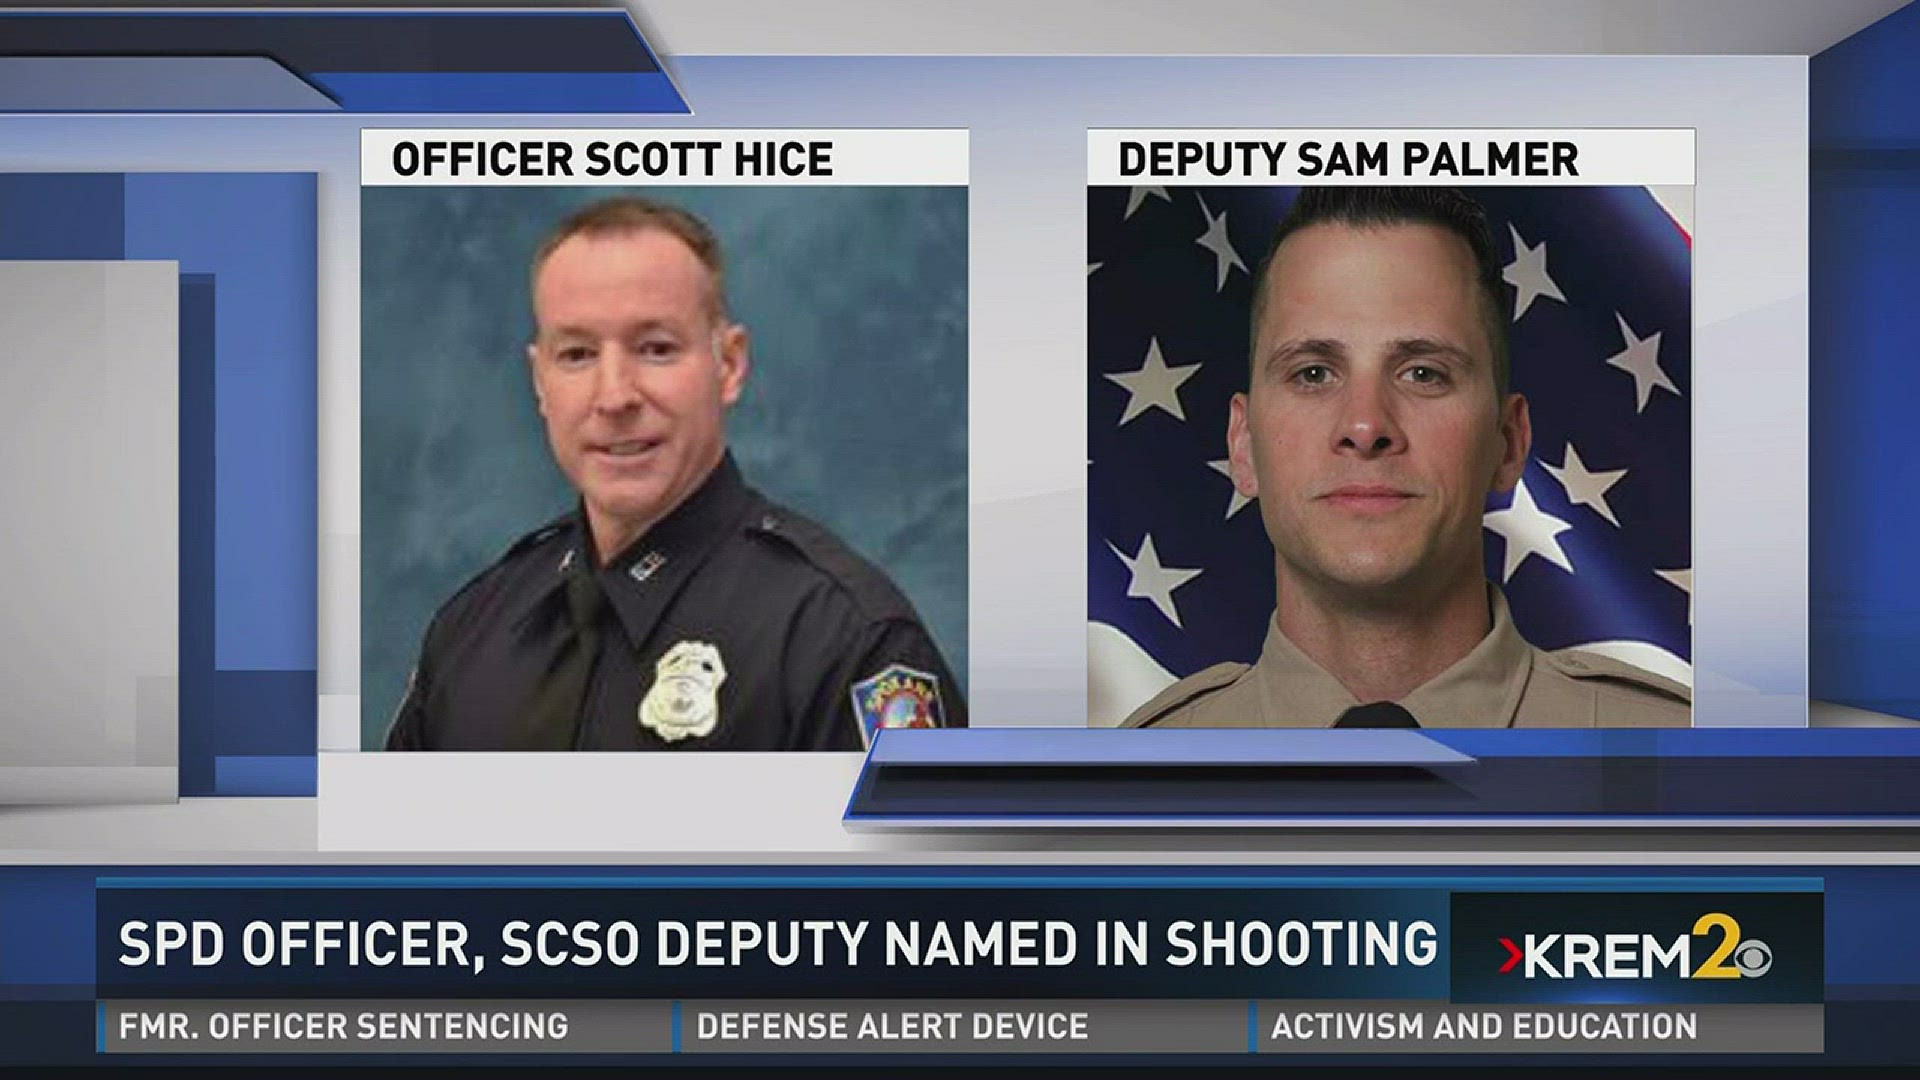 SPD officer, SCSO deputy in Hillyard officer-involved shooting identified